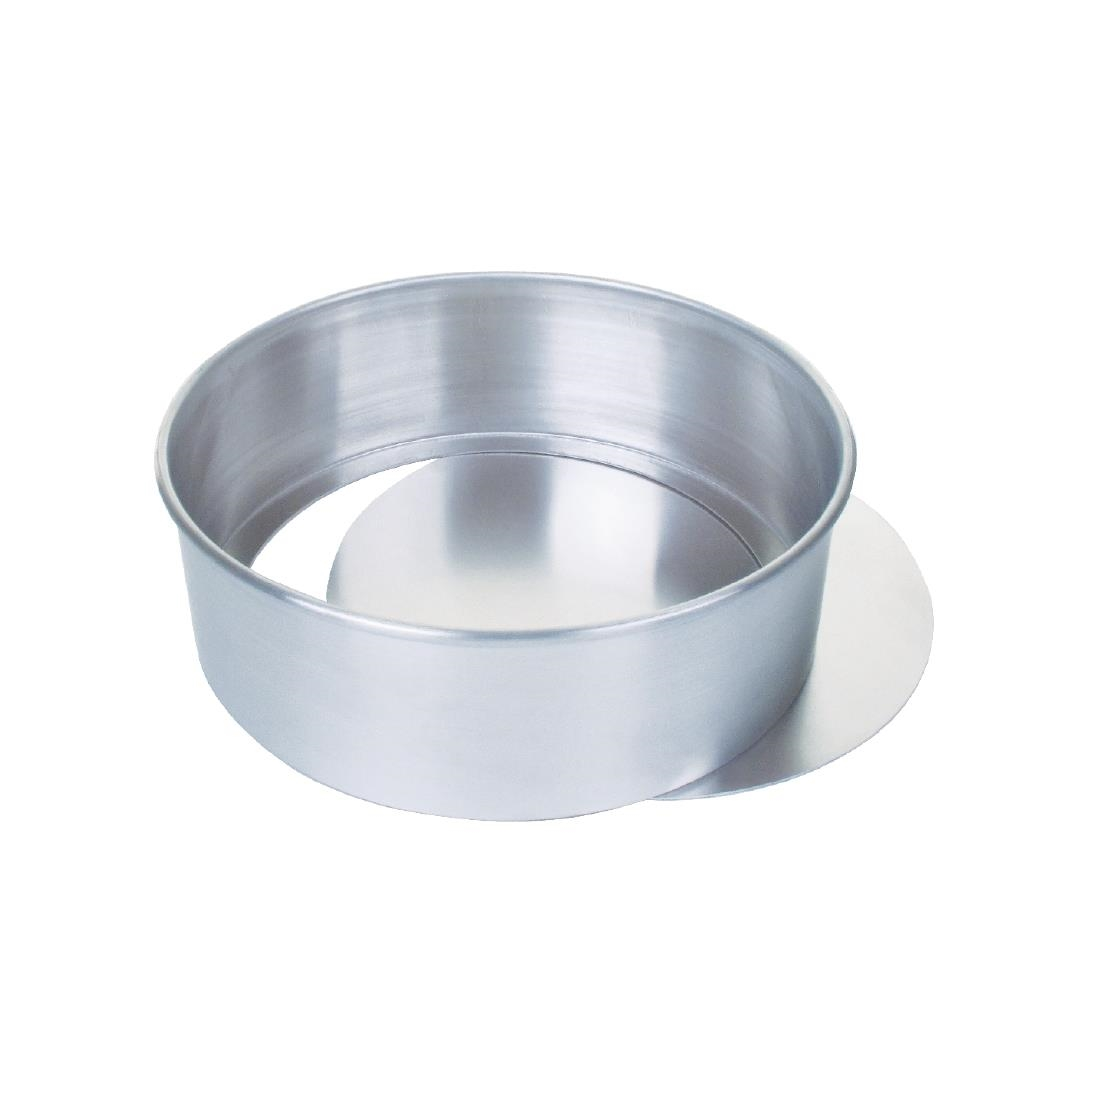 Aluminium Cake Tin With Removable Base 310mm JD Catering Equipment Solutions Ltd